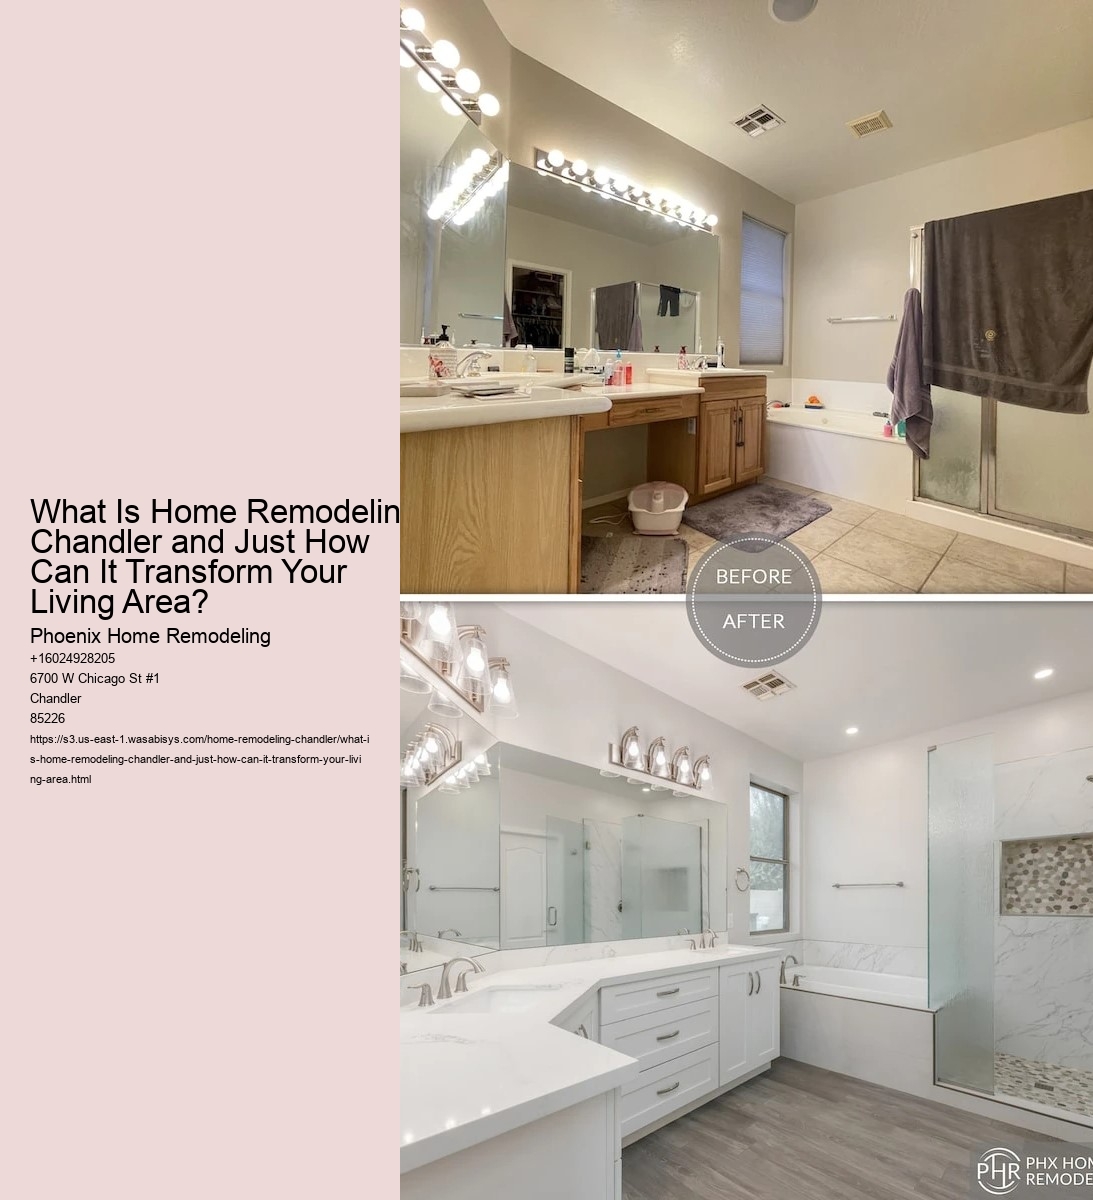 What Is Home Remodeling Chandler and Just How Can It Transform Your Living Area?